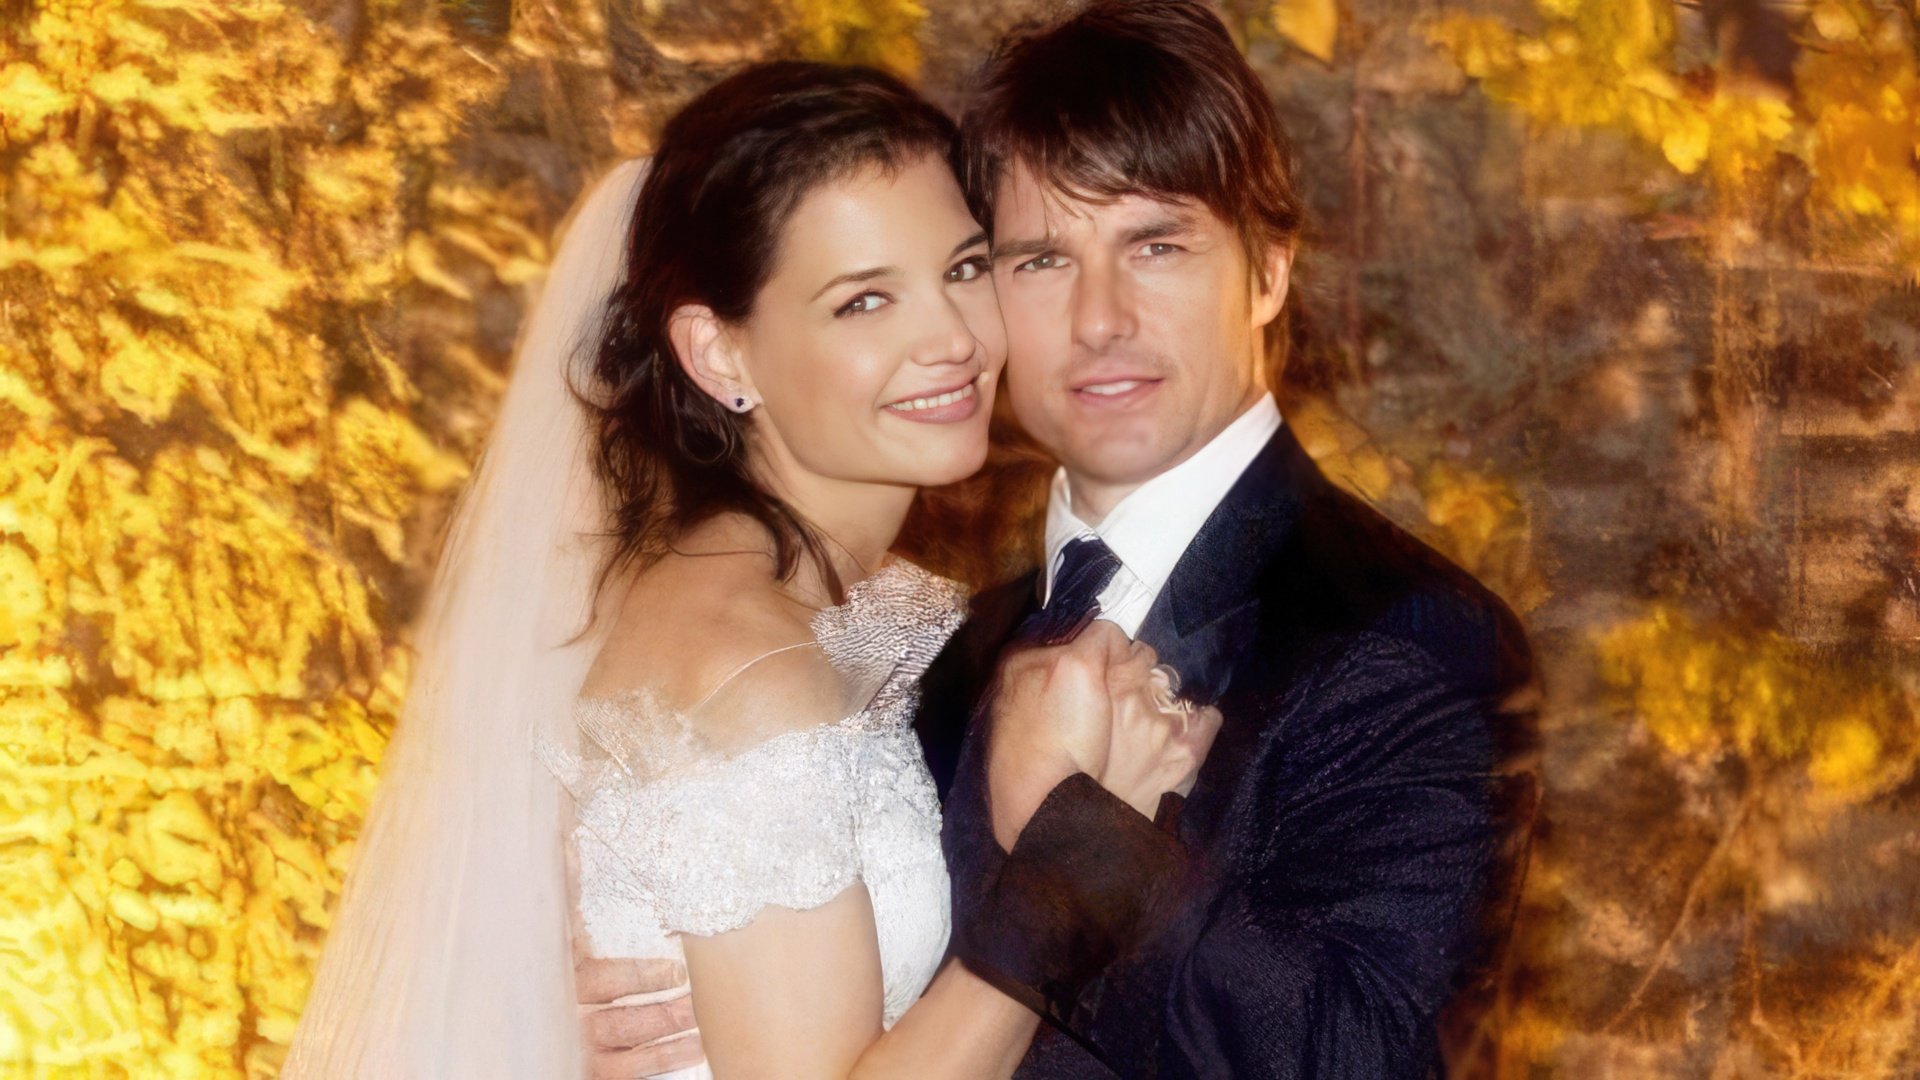 Tom Cruise and Katie Holmes’ wedding